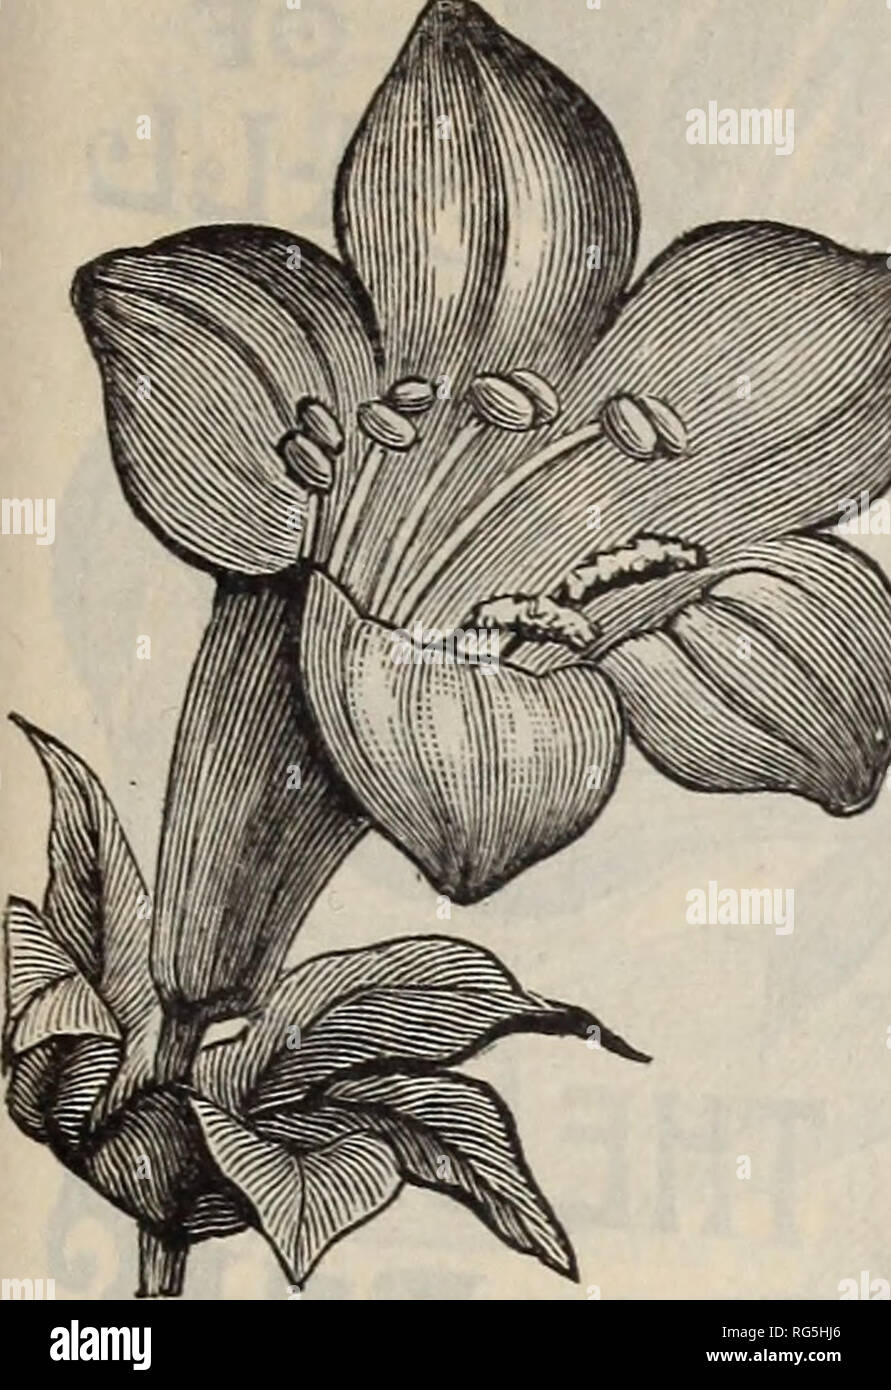 . Burpee's farm annual, 1892. Nursery stock Pennsylvania Philadelphia Catalogs; Flowers Catalogs; Vegetables Catalogs; Seeds Catalogs. SEEDS OF ANNUAL CLIMBERS. 135. PER PKT. LOPHOSPERMUM Scandens. This is one of the mosi beautiful climbing annuals, and is very easily grown. It has elegant, grace- Mill' 11 illllil 0' lilMiii f*-^! flowers, of large size, resembling fox- ^WH^K^'&quot;^^&quot;^' gloves in shape, and ^ vj^^^ of a rich rosy-purple -&quot;^'-^^^^ color. The foliage is //^ v,;^r^j|^ff^^m ful, of velvety text- P^^^^^^^B ure 10 lV:.i1^^Mi MAURANDYA. Charming climbers, elegant alike in Stock Photo